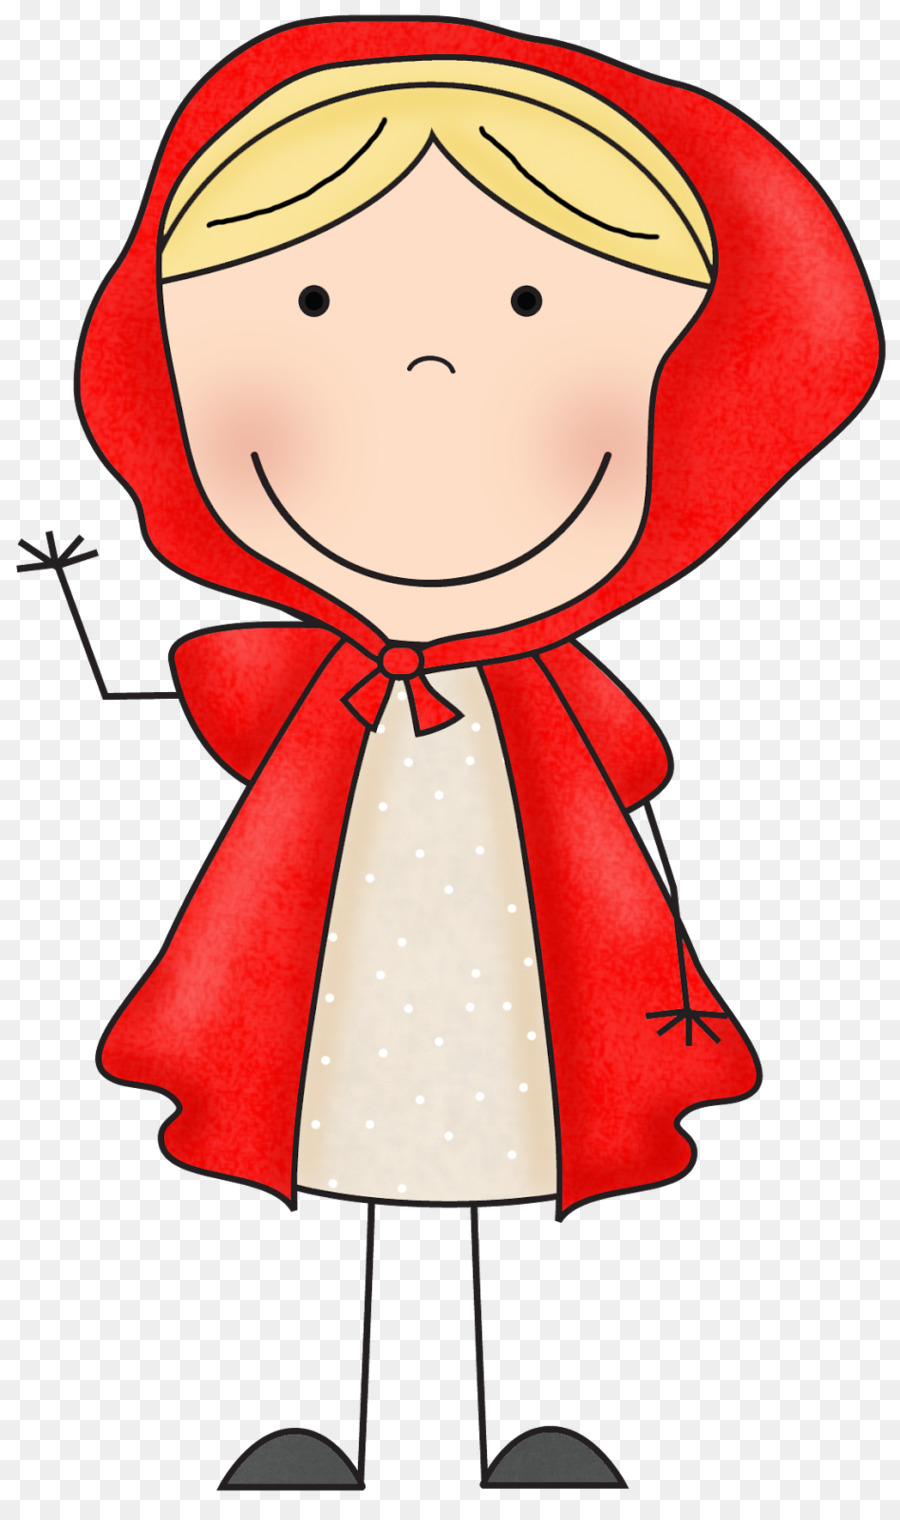 Big Bad Wolf Goldilocks and the Three Bears Little Red Riding Hood Clip art - Little Red Cliparts png download - 948*1600 - Free Transparent  png Download.